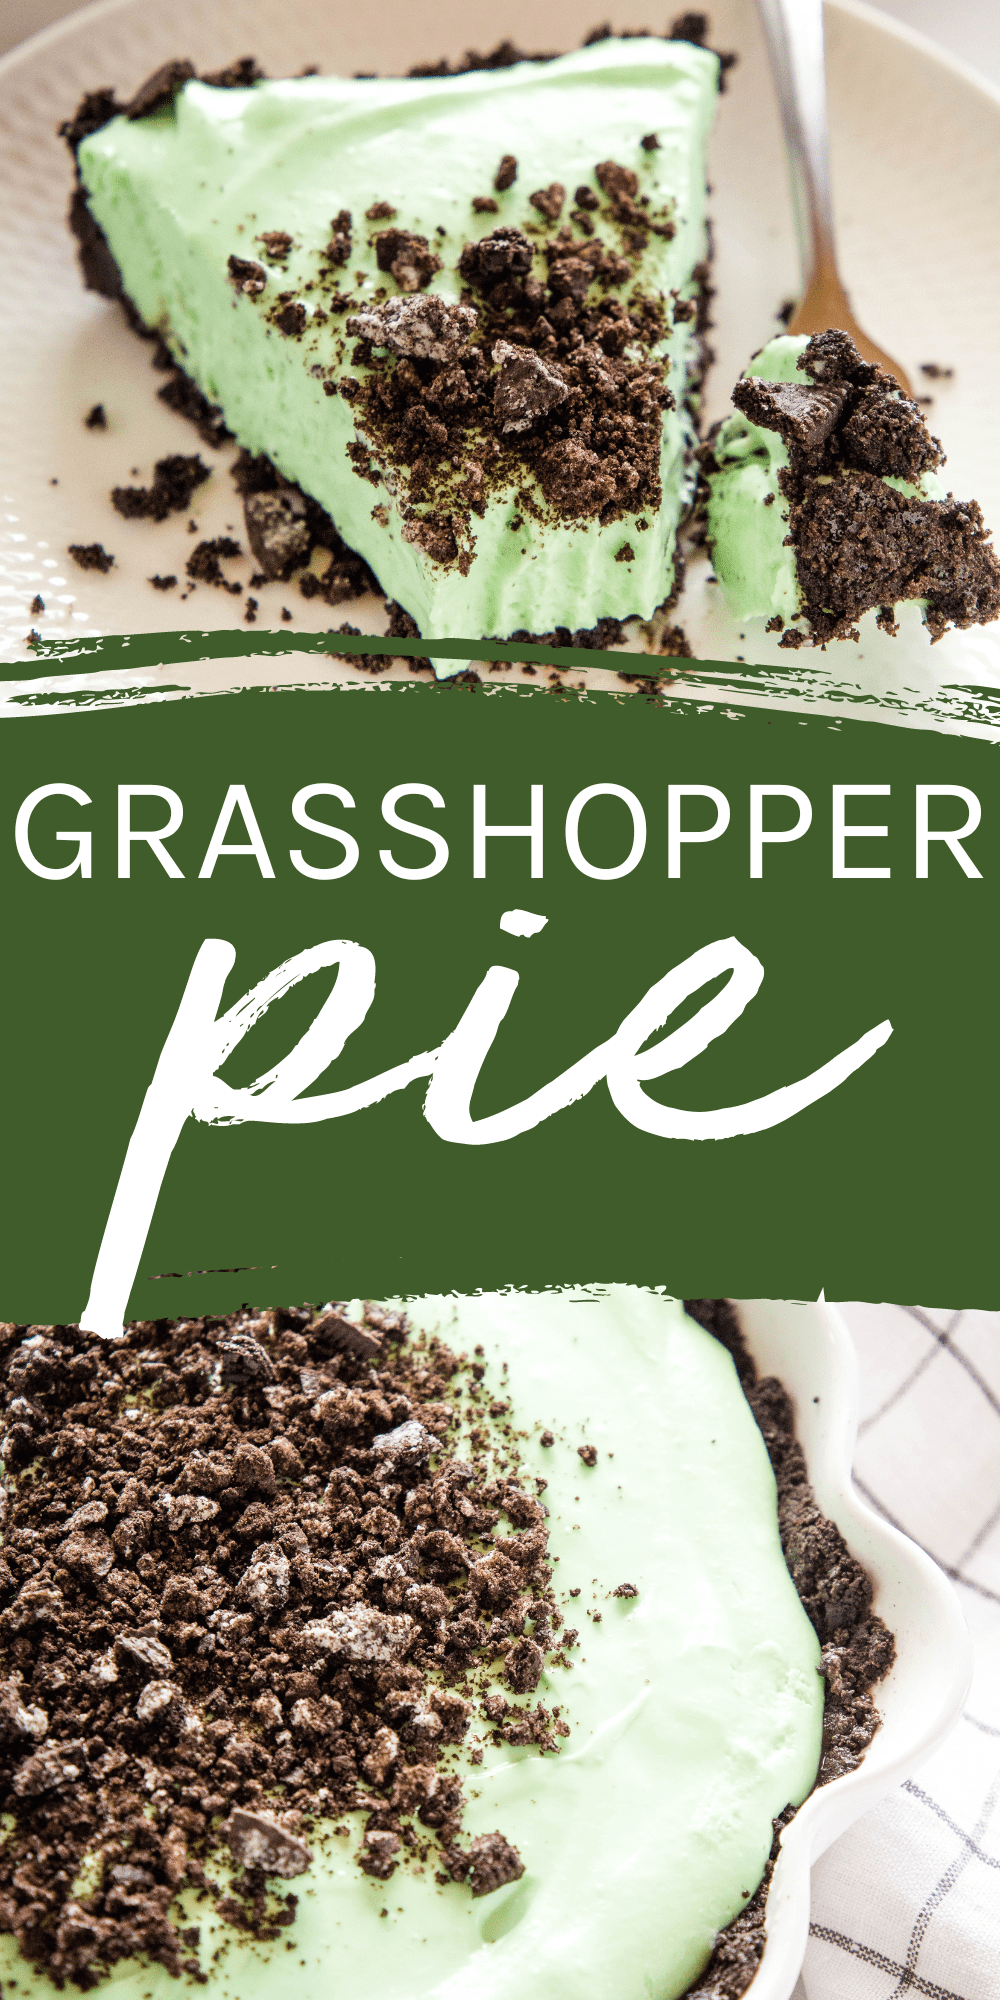 This Grasshopper Pie recipe is an easy classic no-bake dessert with an Oreo cookie crust and a creamy mint filling! Recipe from thebusybaker.ca! #grasshopperpie #cremedementhe #mintdessert #mintchocolate #grasshopper #nobakedessert via @busybakerblog